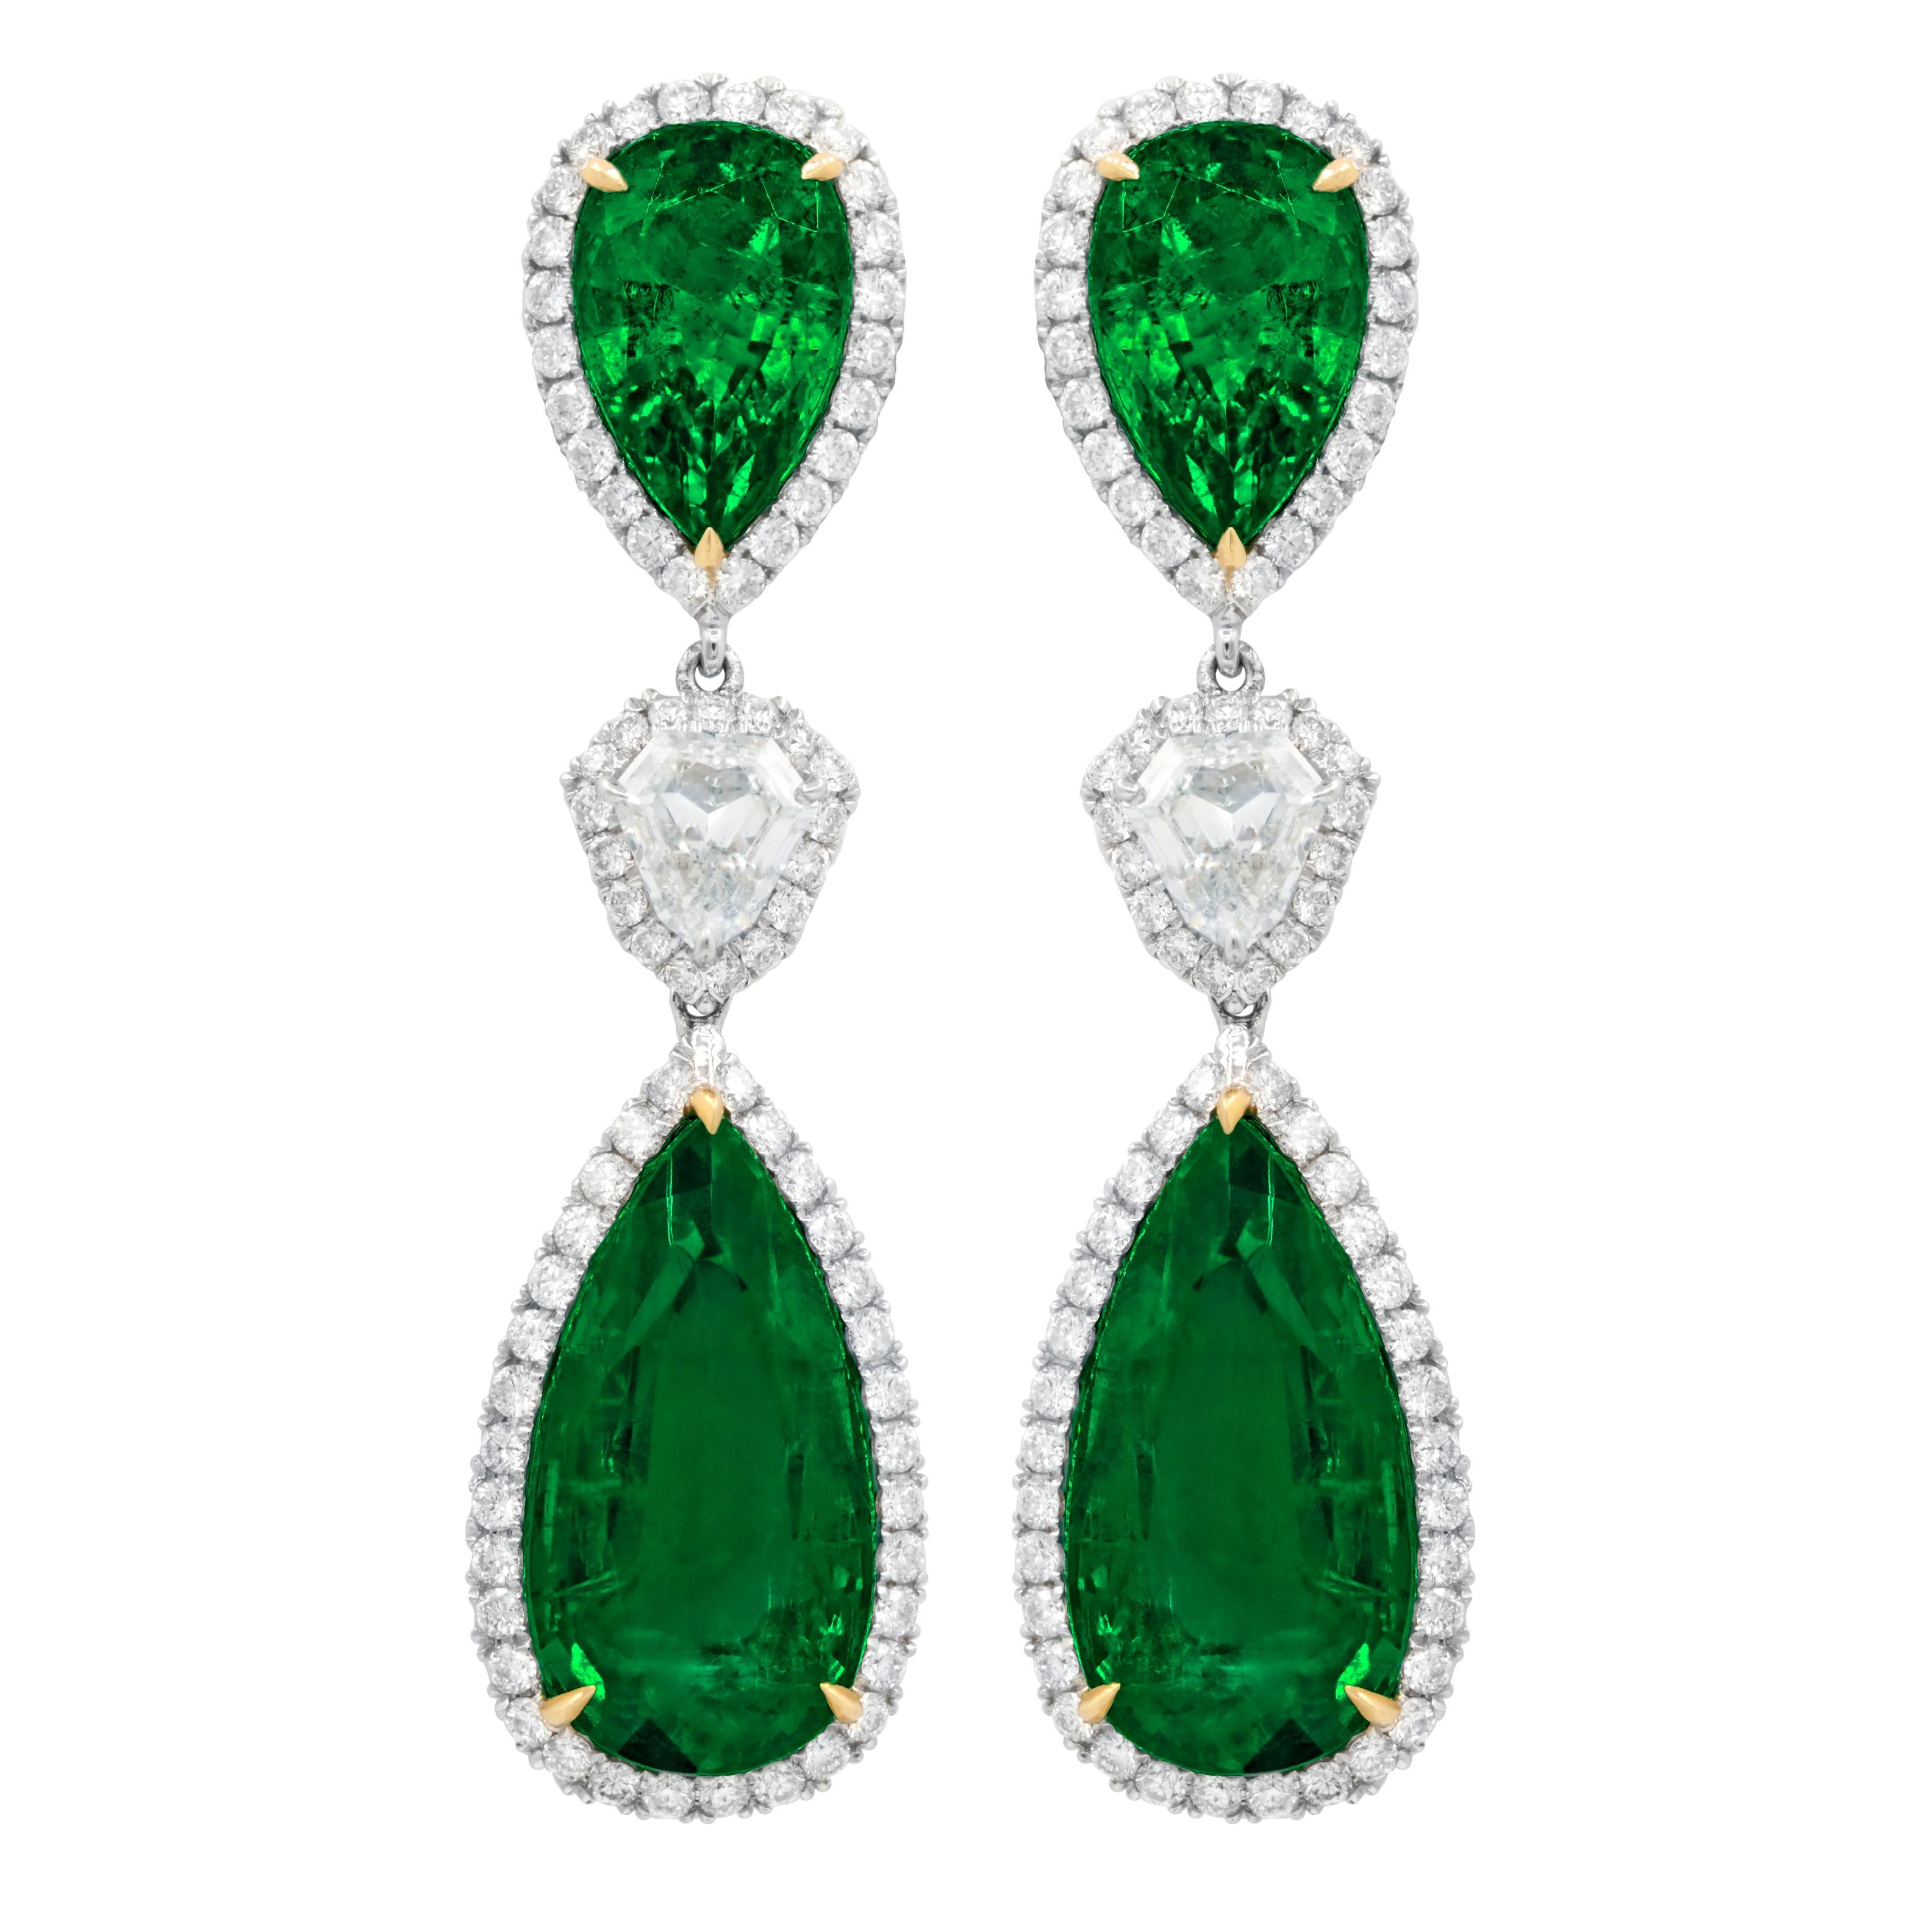 Pear shaped emerald diamond drop earrings with two GIA certified  em (29.50em) and two emeralds all surrounded by micropave white round diamonds(4.60ct) 
